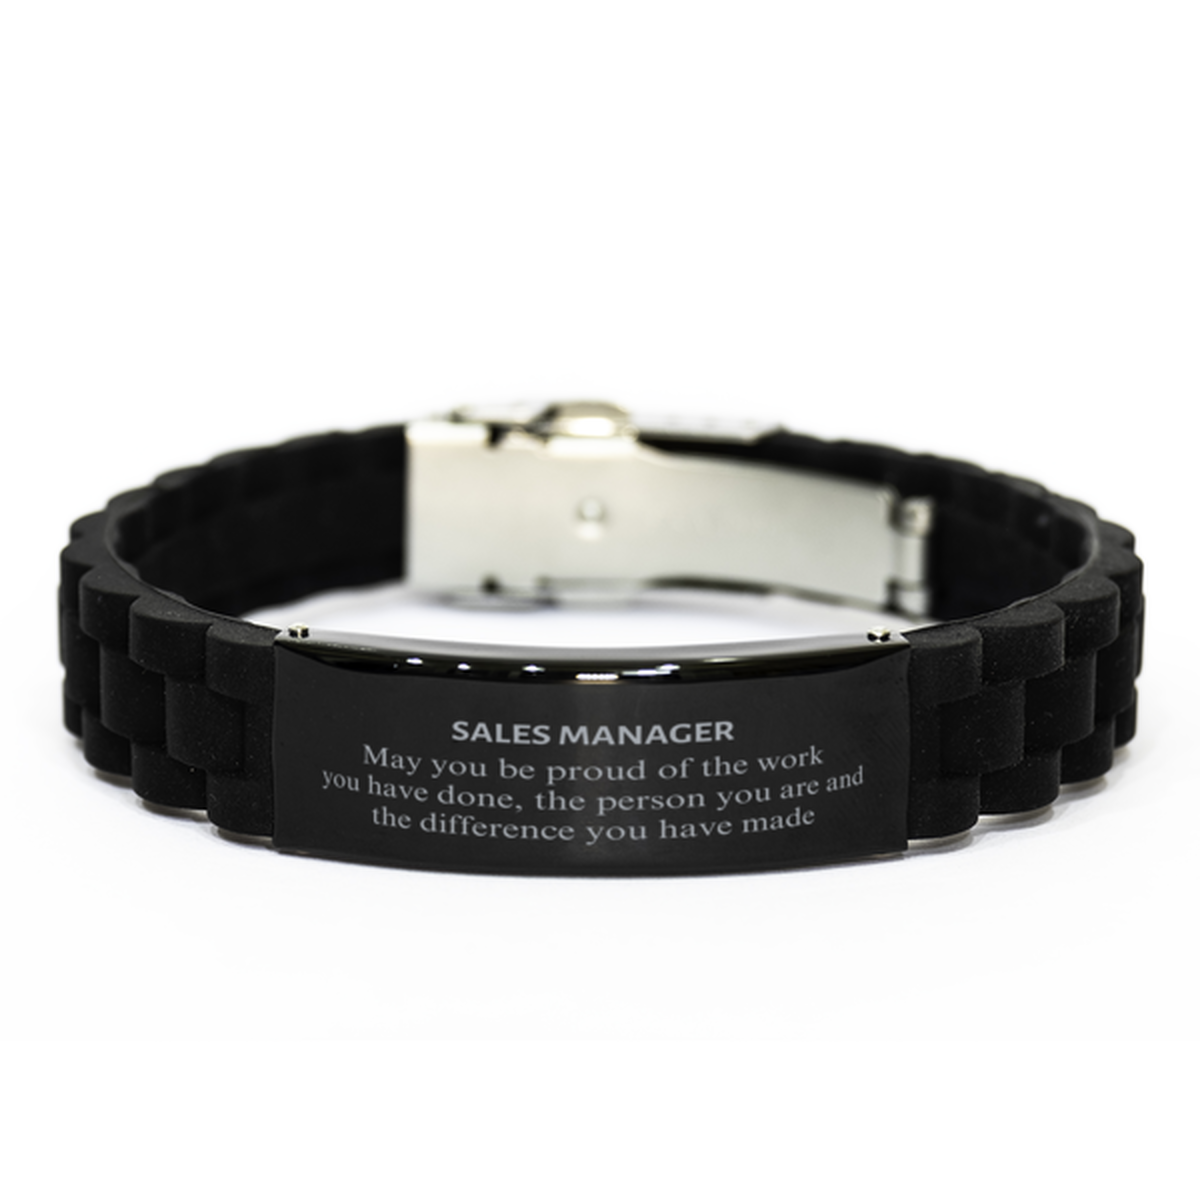 Sales Manager May you be proud of the work you have done, Retirement Sales Manager Black Glidelock Clasp Bracelet for Colleague Appreciation Gifts Amazing for Sales Manager